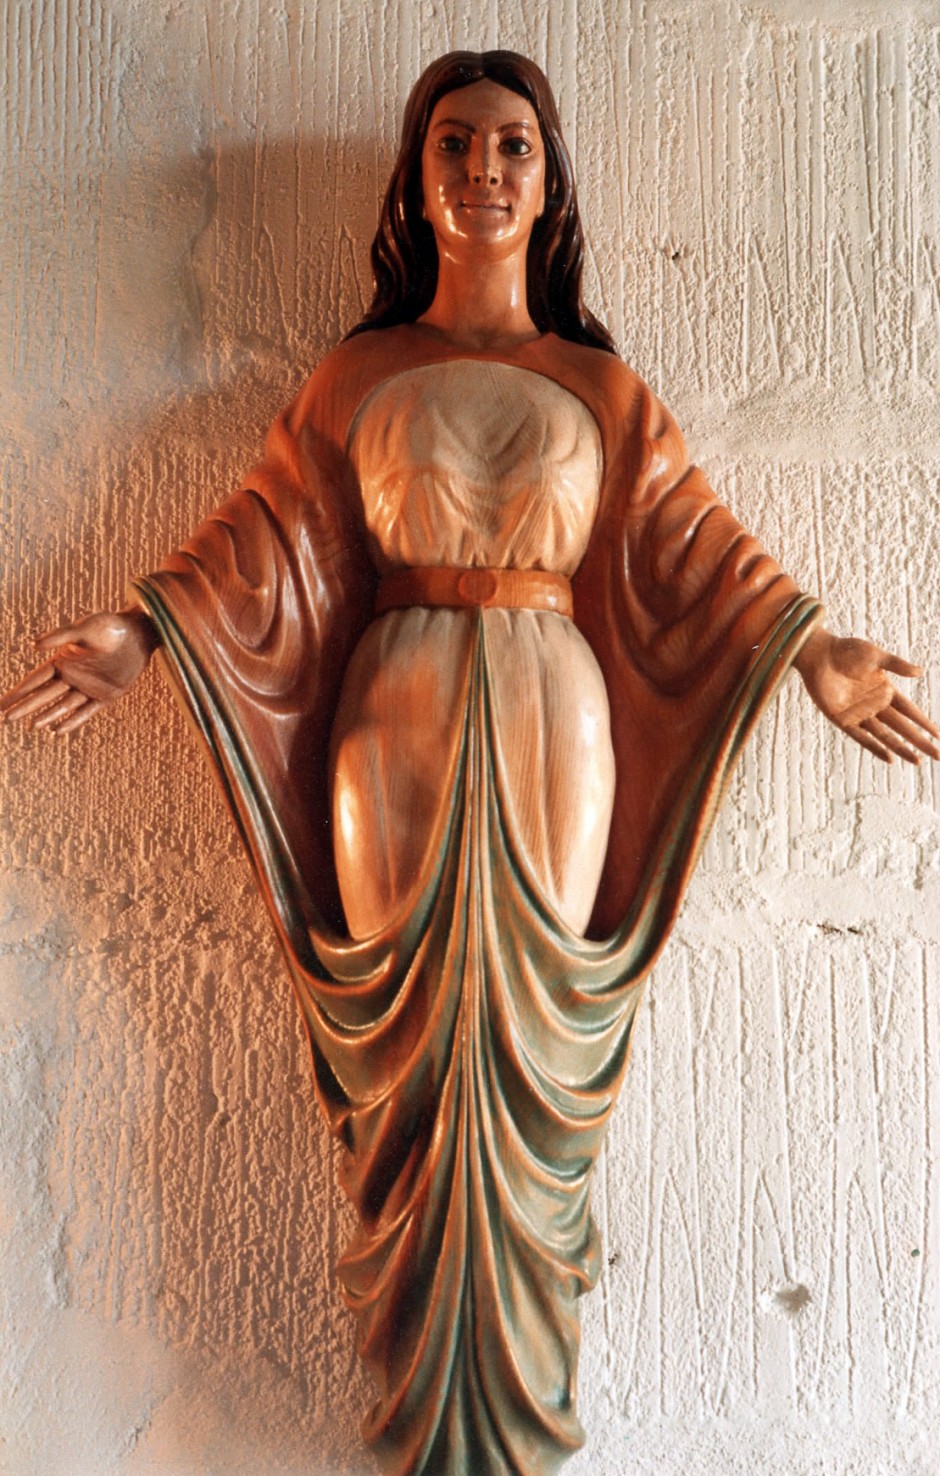 Madonna In Pine, Wood Carving. - wood carving, pine, polychromed, virgin mary madonna